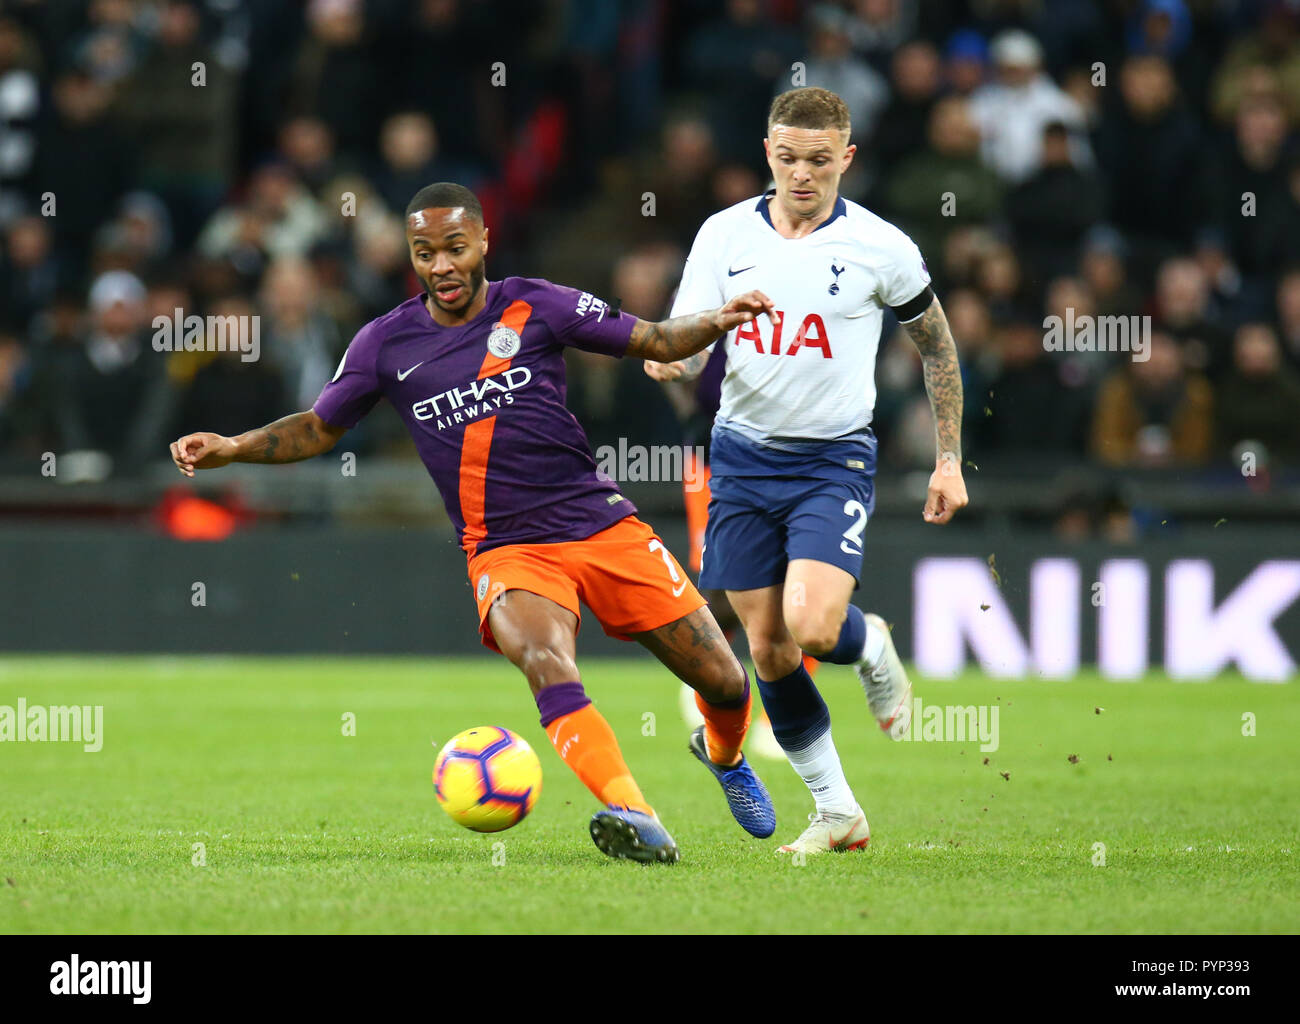 London, England - October 29, 2018 Manchester City's Raheem Sterling during Premier League between Tottenham Hotspur  and Manchester City at Wembley stadium , London, England on 29 Oct 2018. Credit Action Foto Sport  FA Premier League and Football League images are subject to DataCo Licence. Editorial use ONLY. No print sales. No personal use sales. NO UNPAID USE Stock Photo